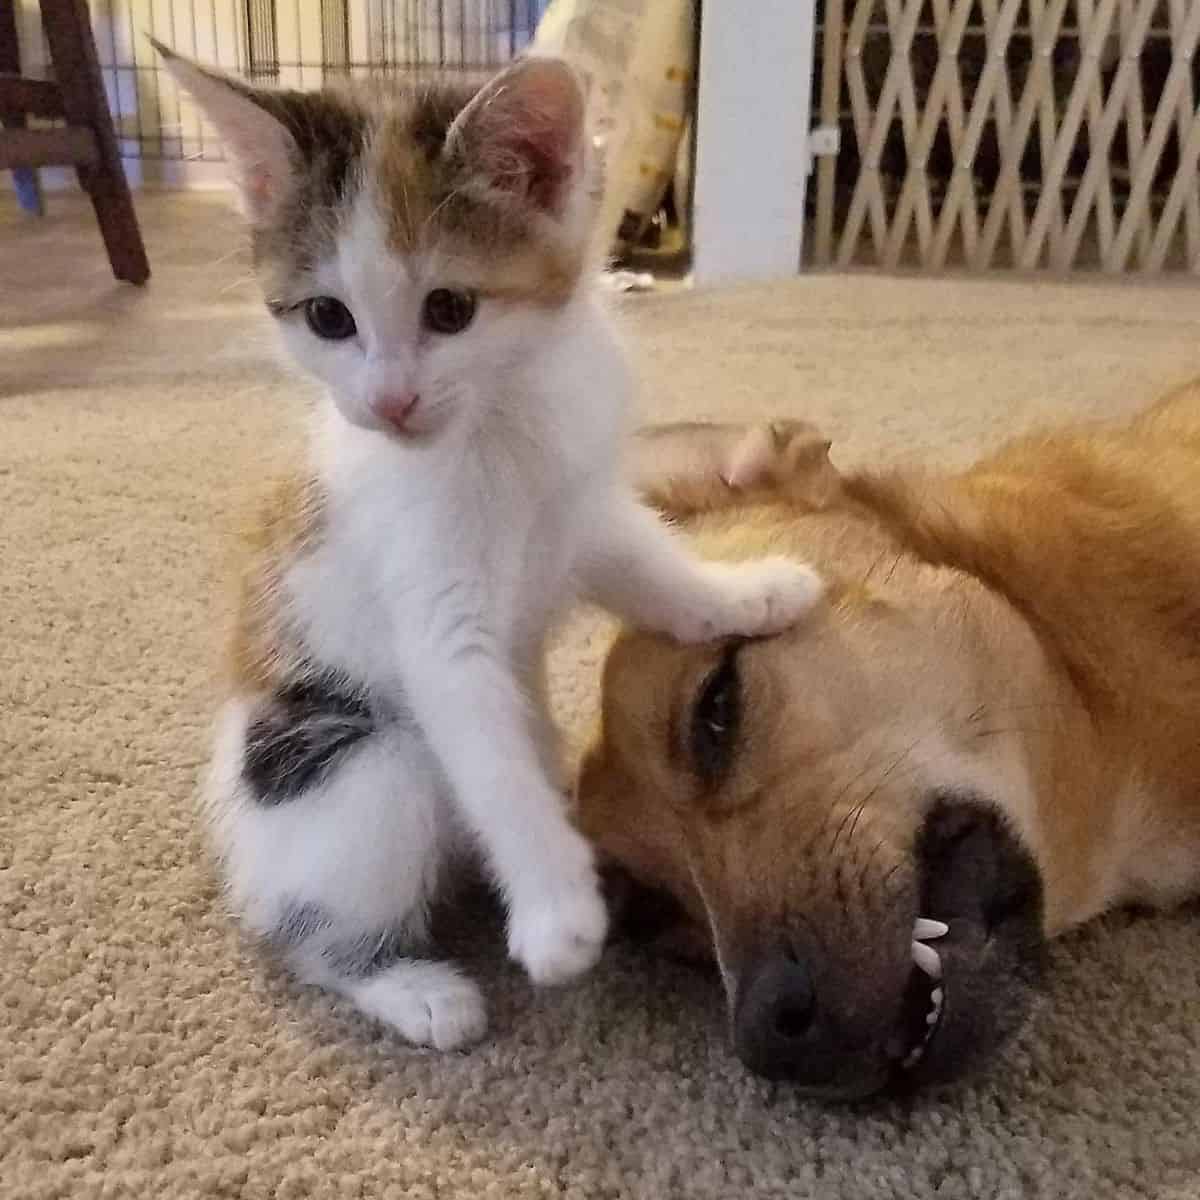 cat holding its paws on dog's head